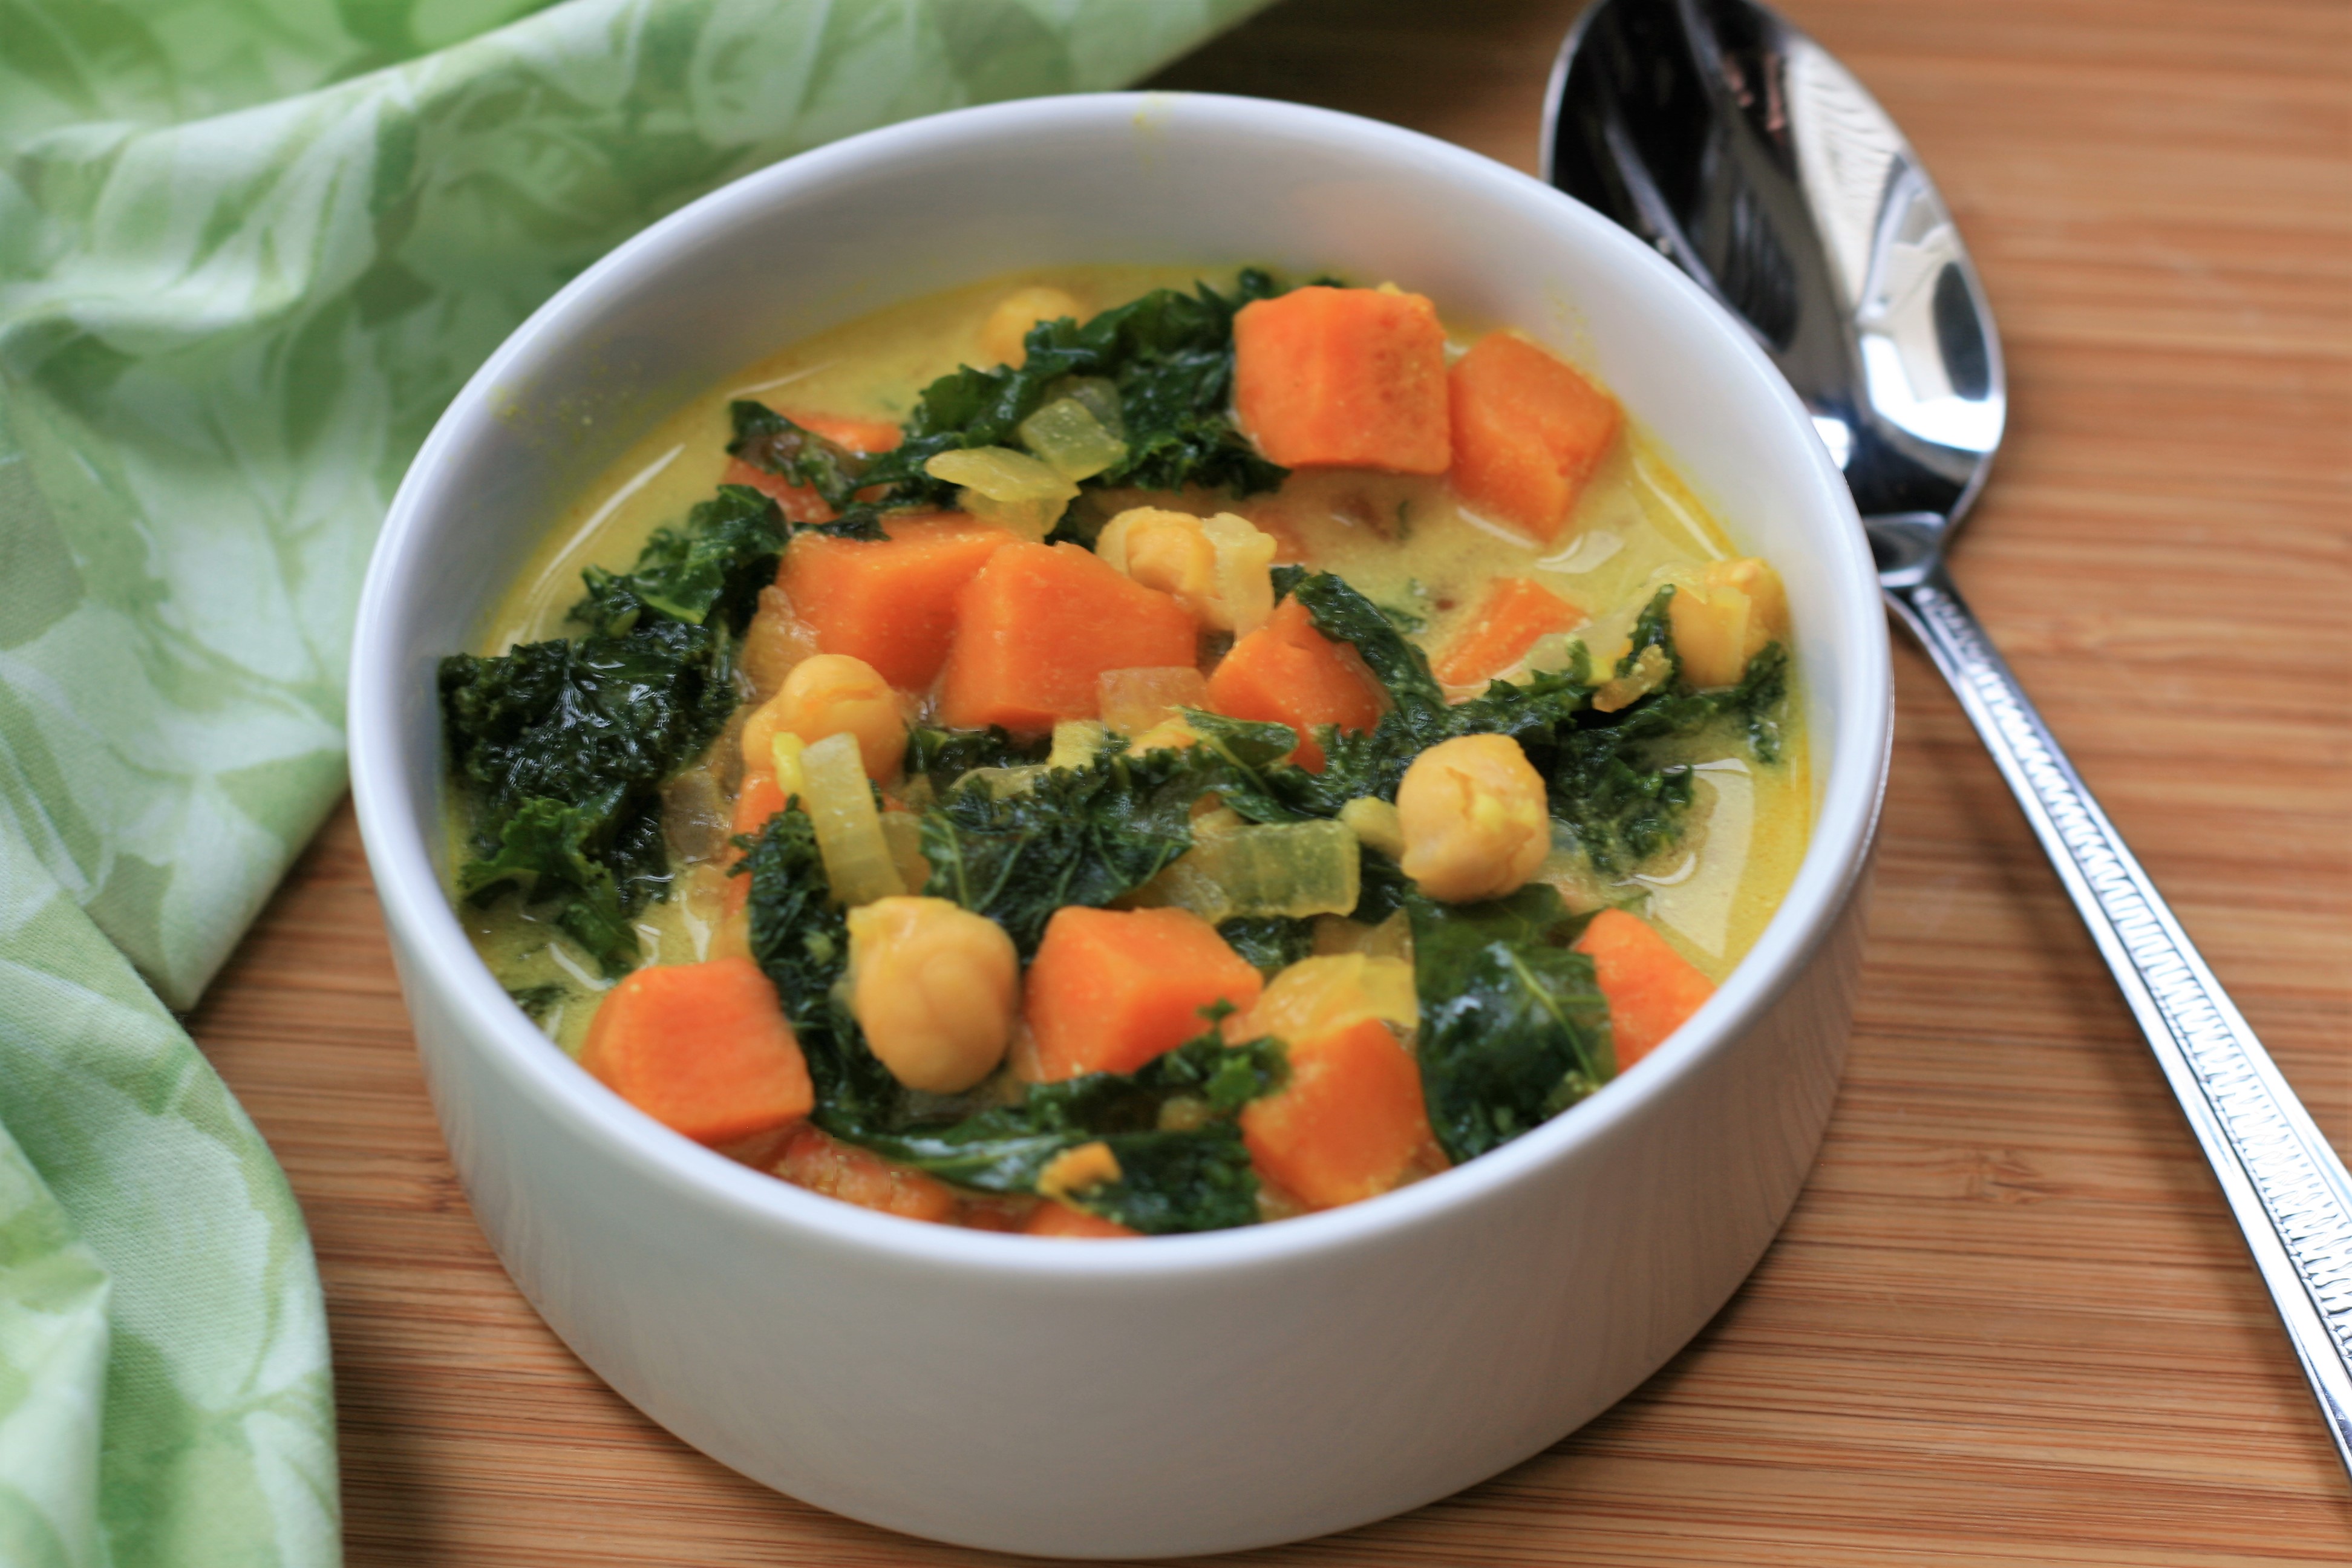 <p>This fabulous soup boasts a handful of anti-inflammatory ingredients, including kale, sweet potation, onion, turmeric, olive oil and chickpeas. The sweet potato and kale provide beta carotene, a form of vitamin A that has anti-inflammatory effects. The spice turmeric provides a beautiful yellow hue, but is also a powerful antioxidant and anti-inflammatory that's linked to reducing the risk of certain cancers. Add a pinch of pepper too &mdash; it boosts the absorption of turmeric by 2000 percent!</p>
                          